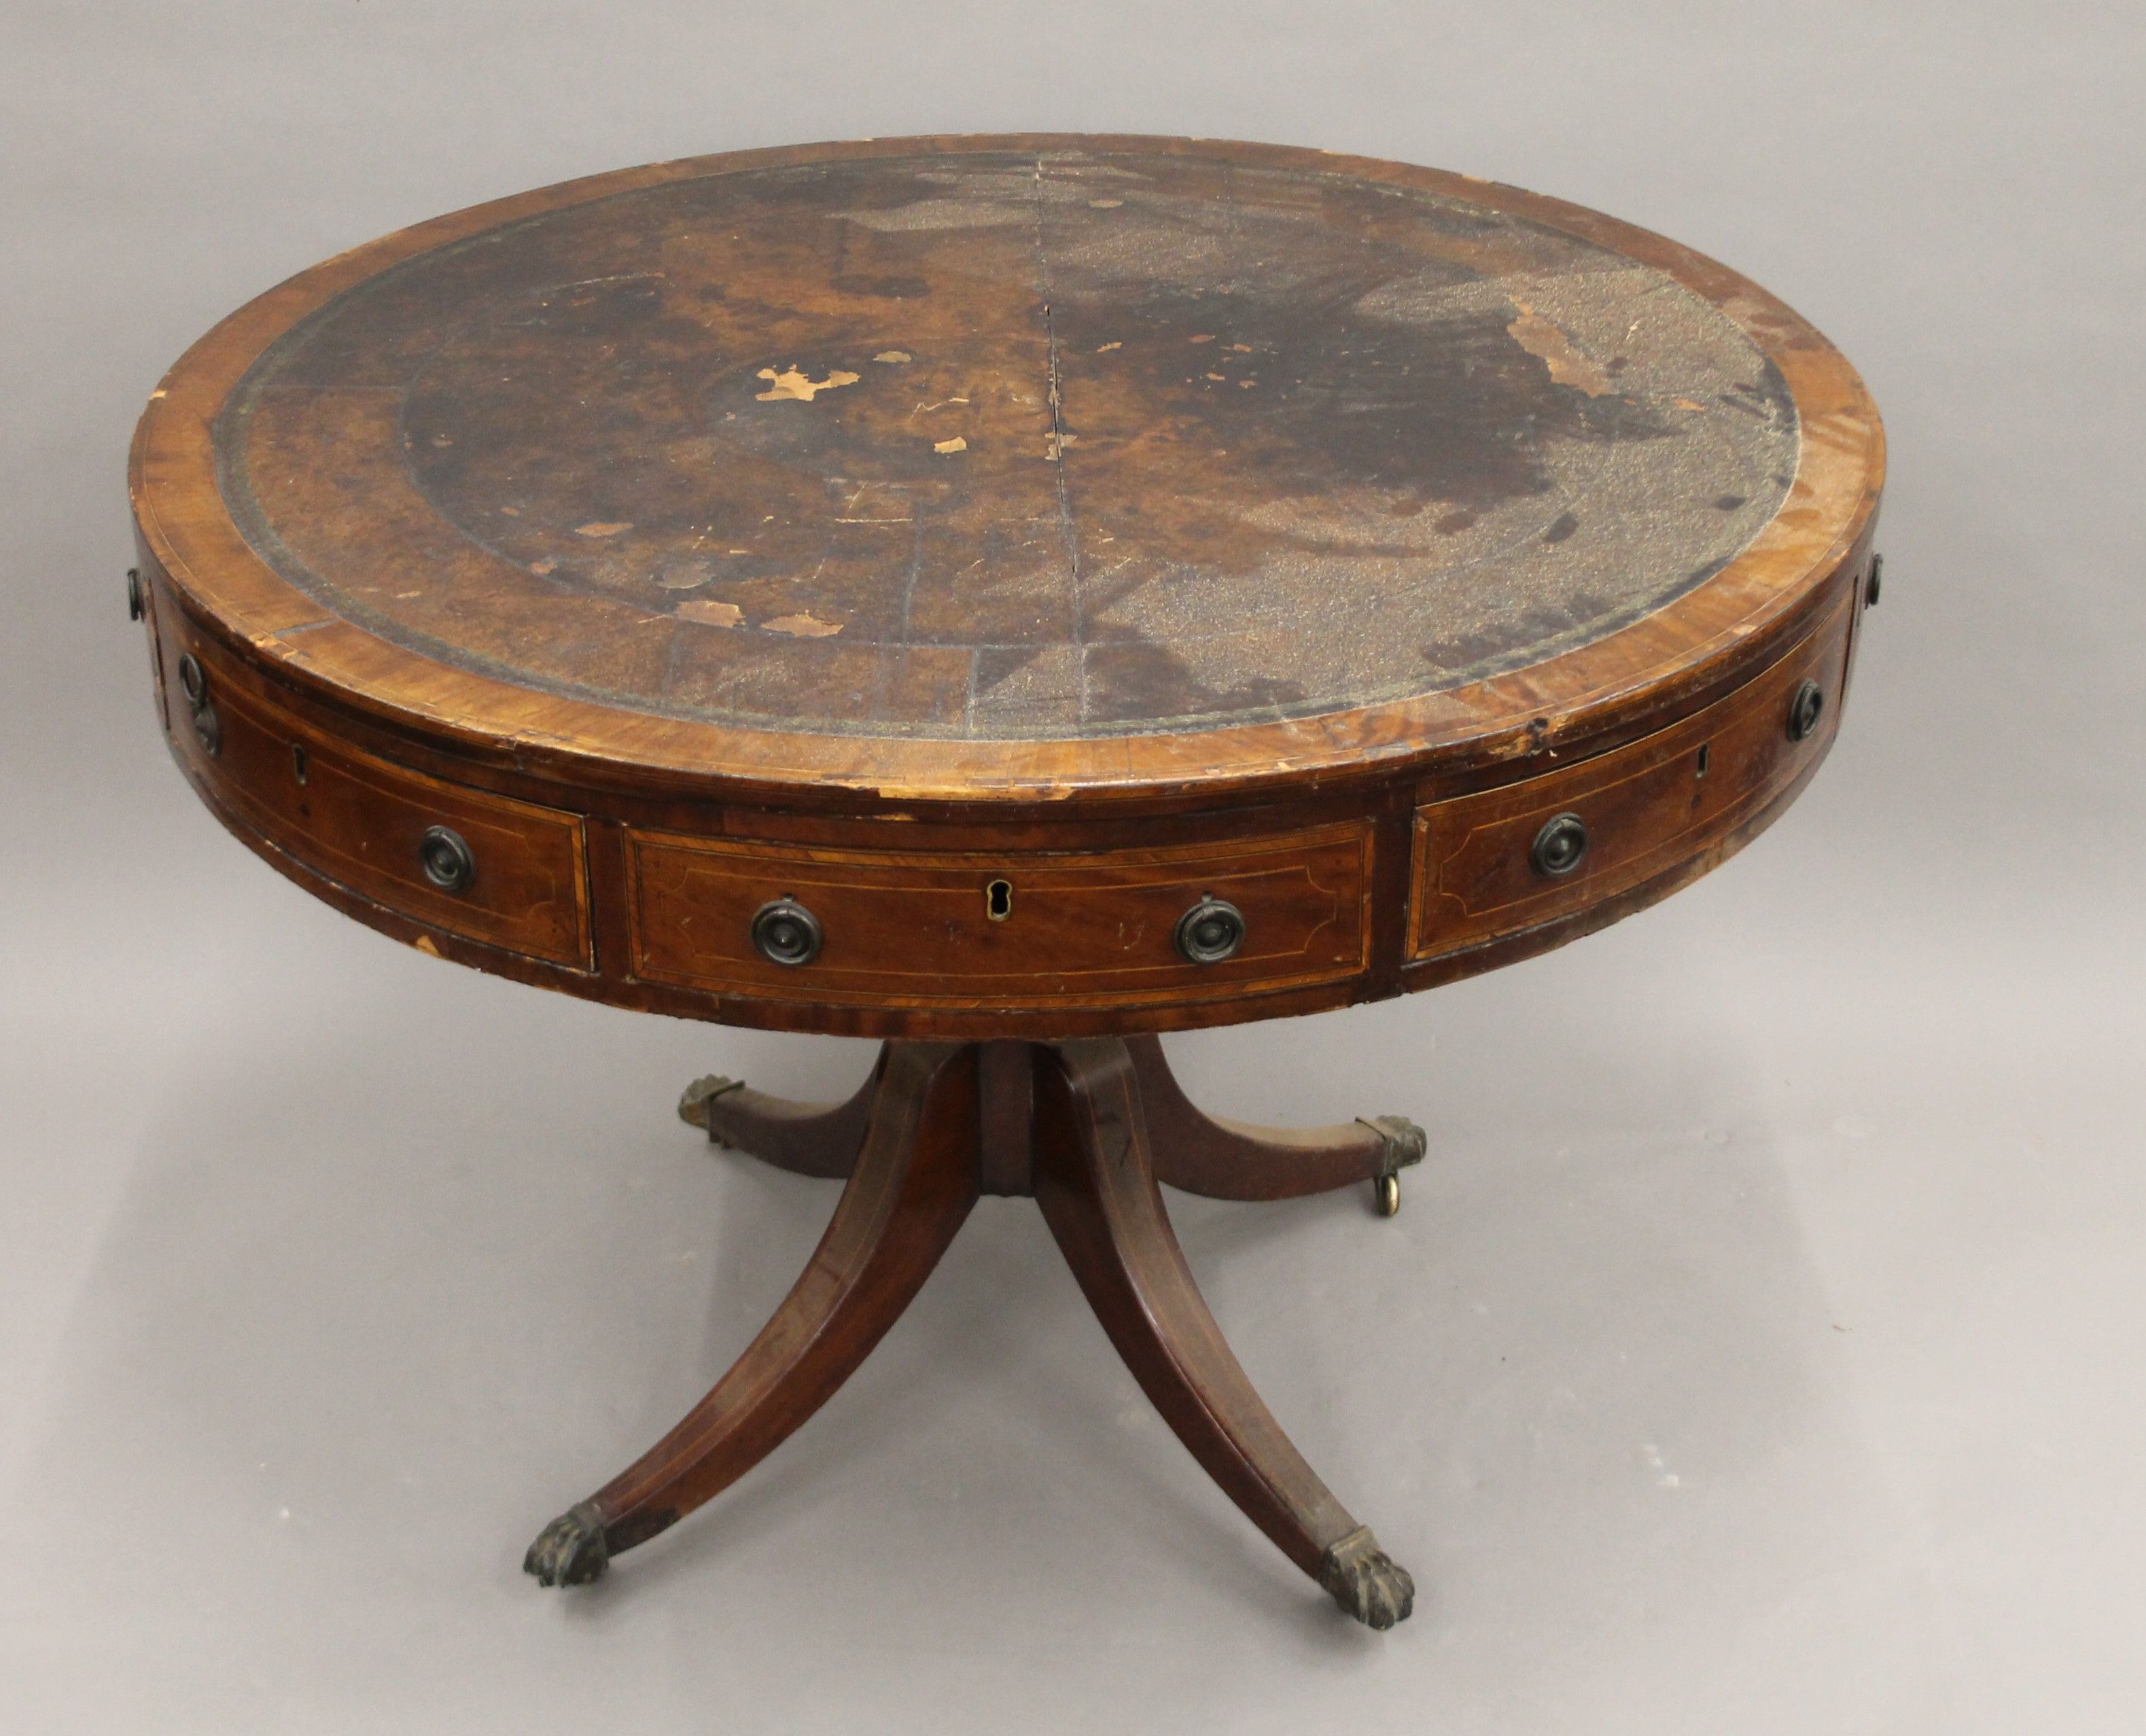 A 19th century mahogany drum table. Approximately 98 cm diameter.